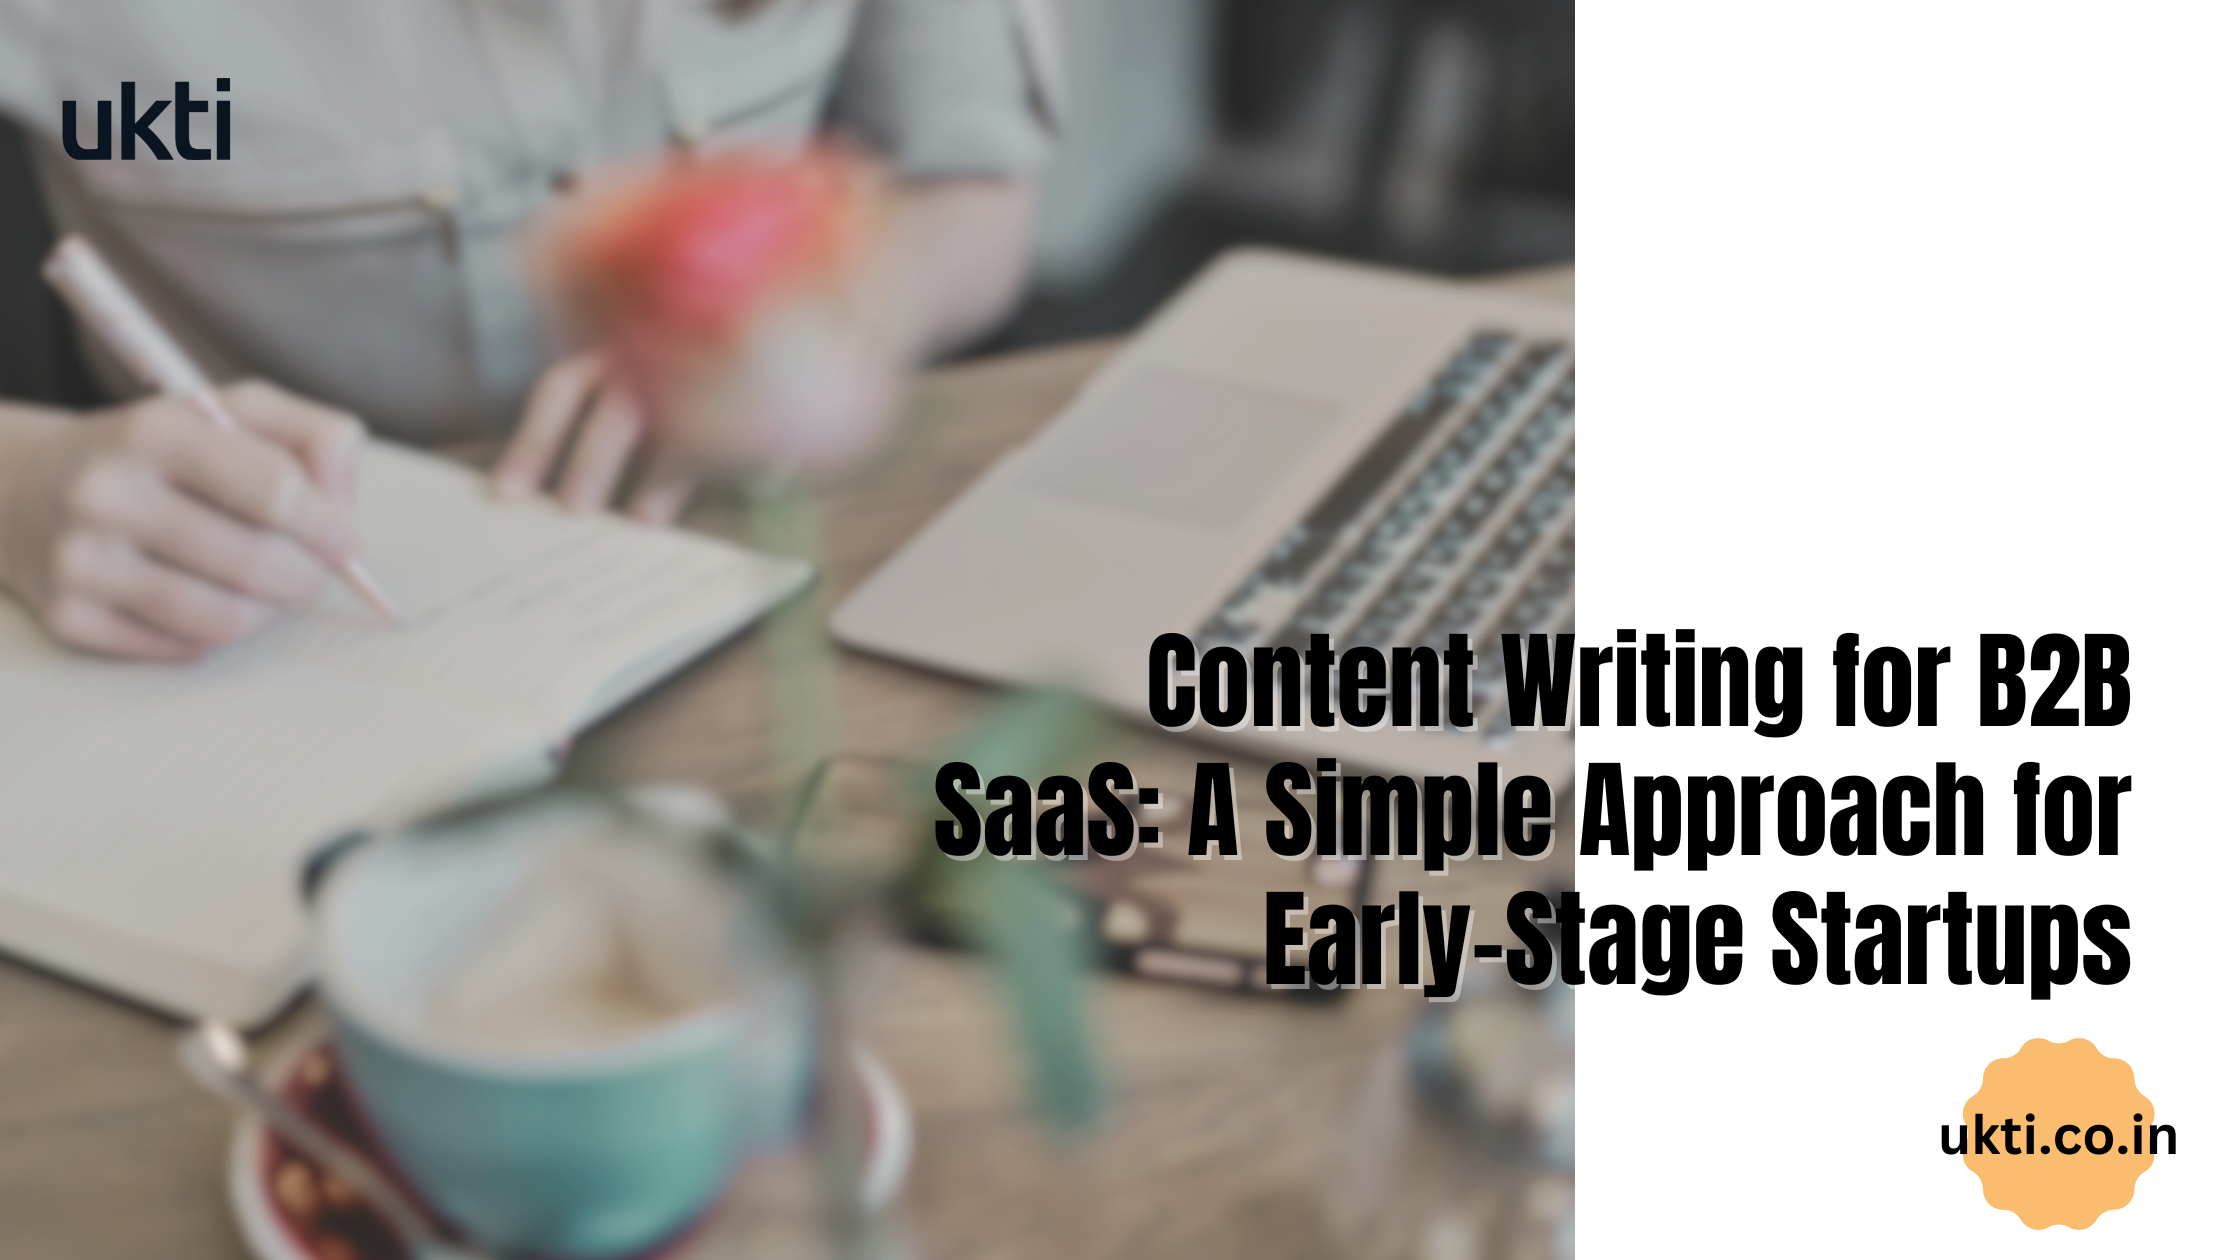 A Simple Approach to B2B SaaS Content Writing